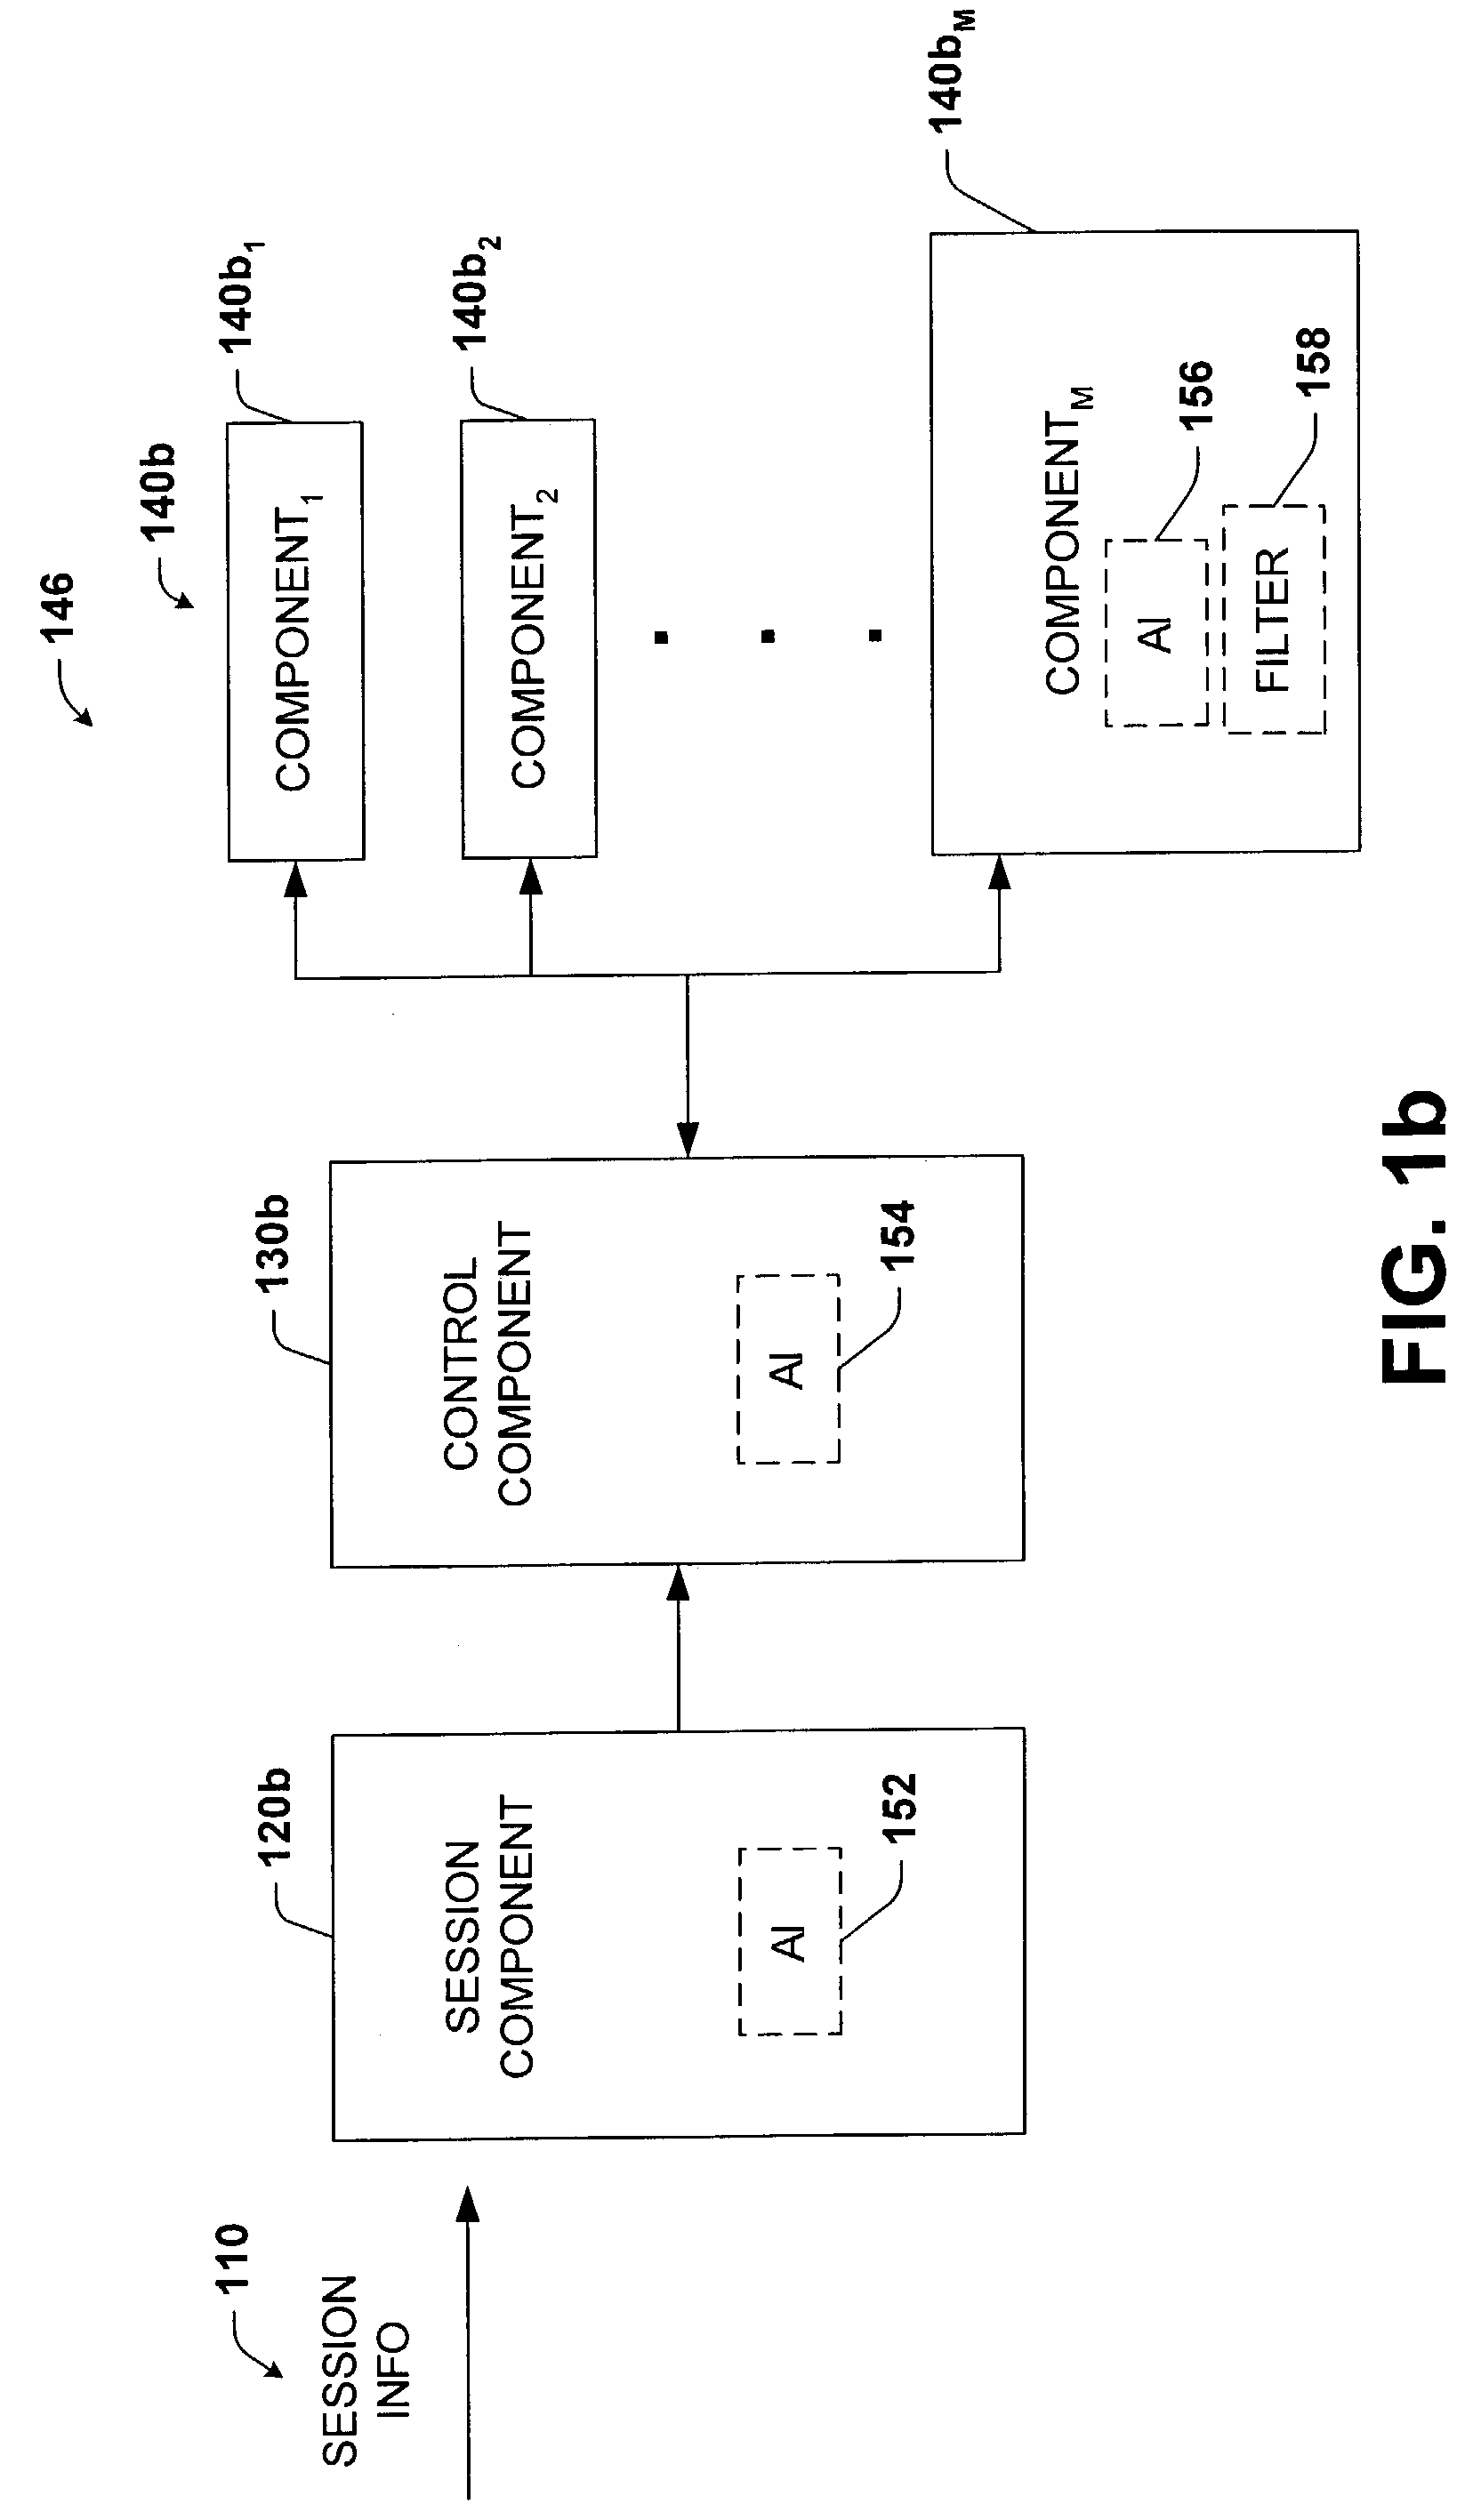 Method to reduce or eliminate audio interference from computer components